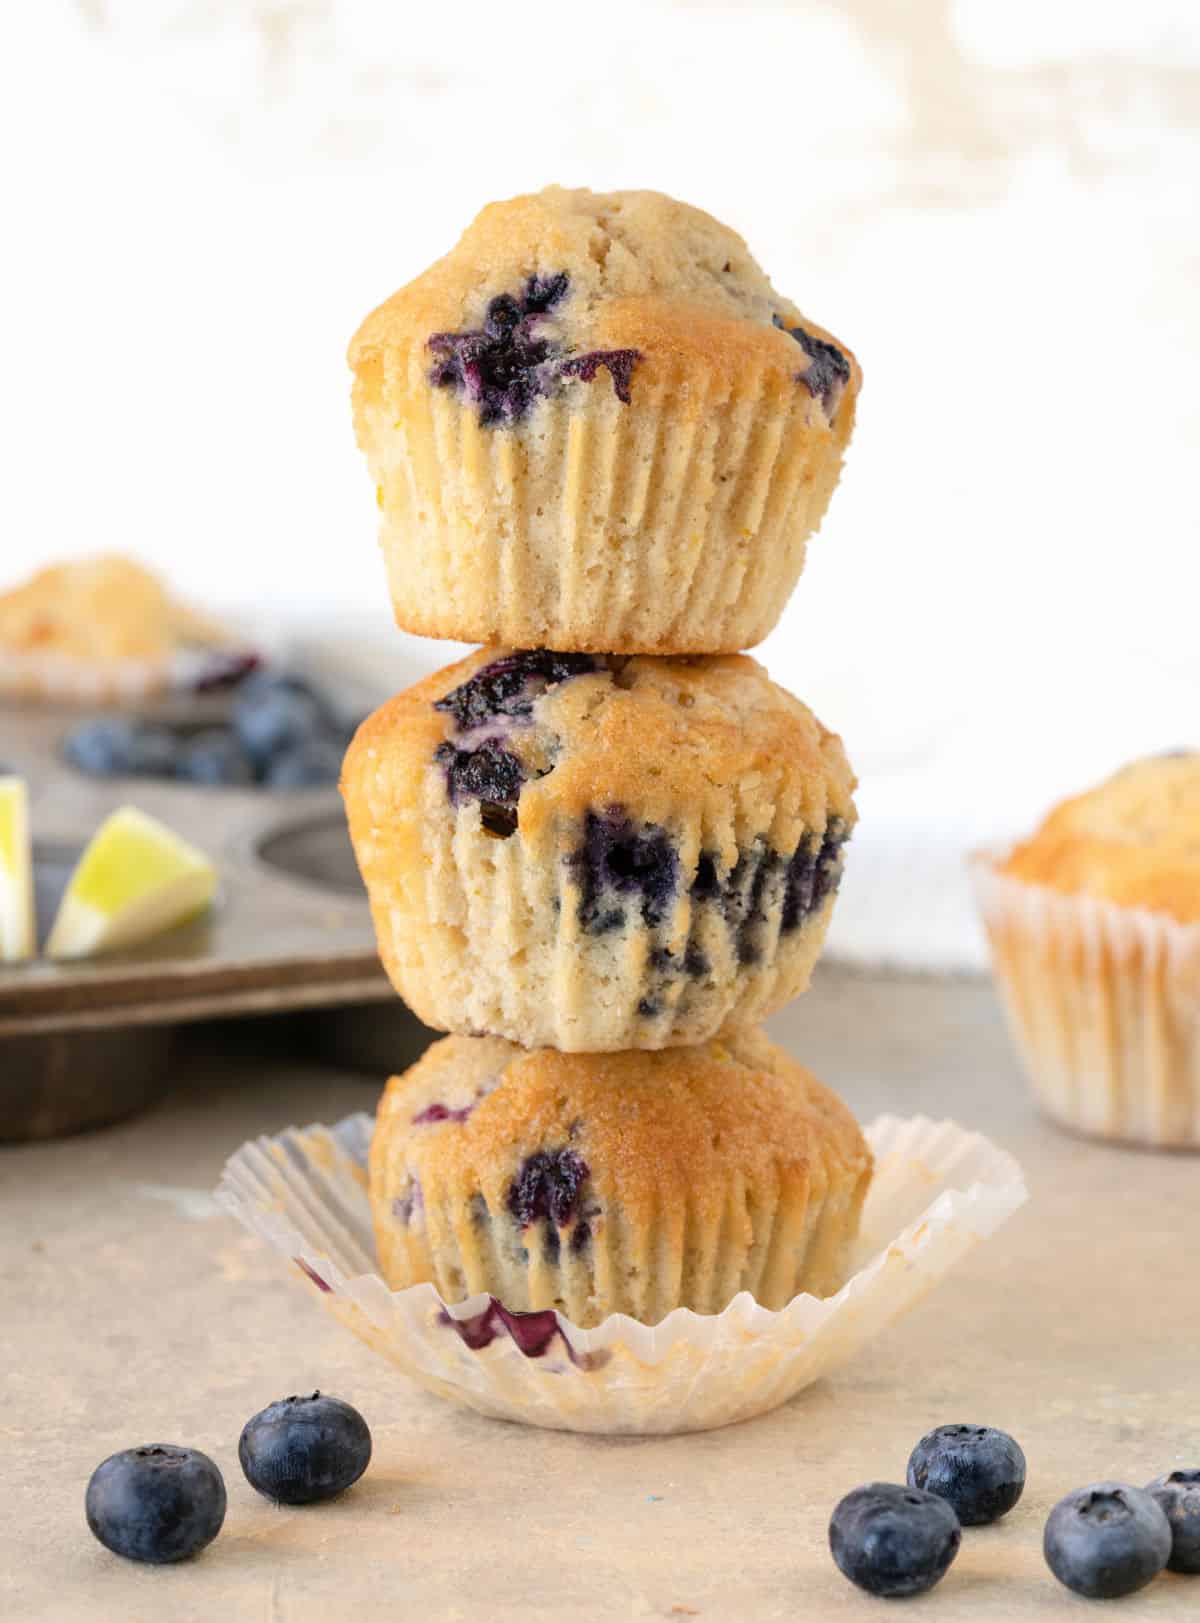 Stack of three blueberry apple muffins on a beige surface with white background. A metal muffin tin and loose blueberries.